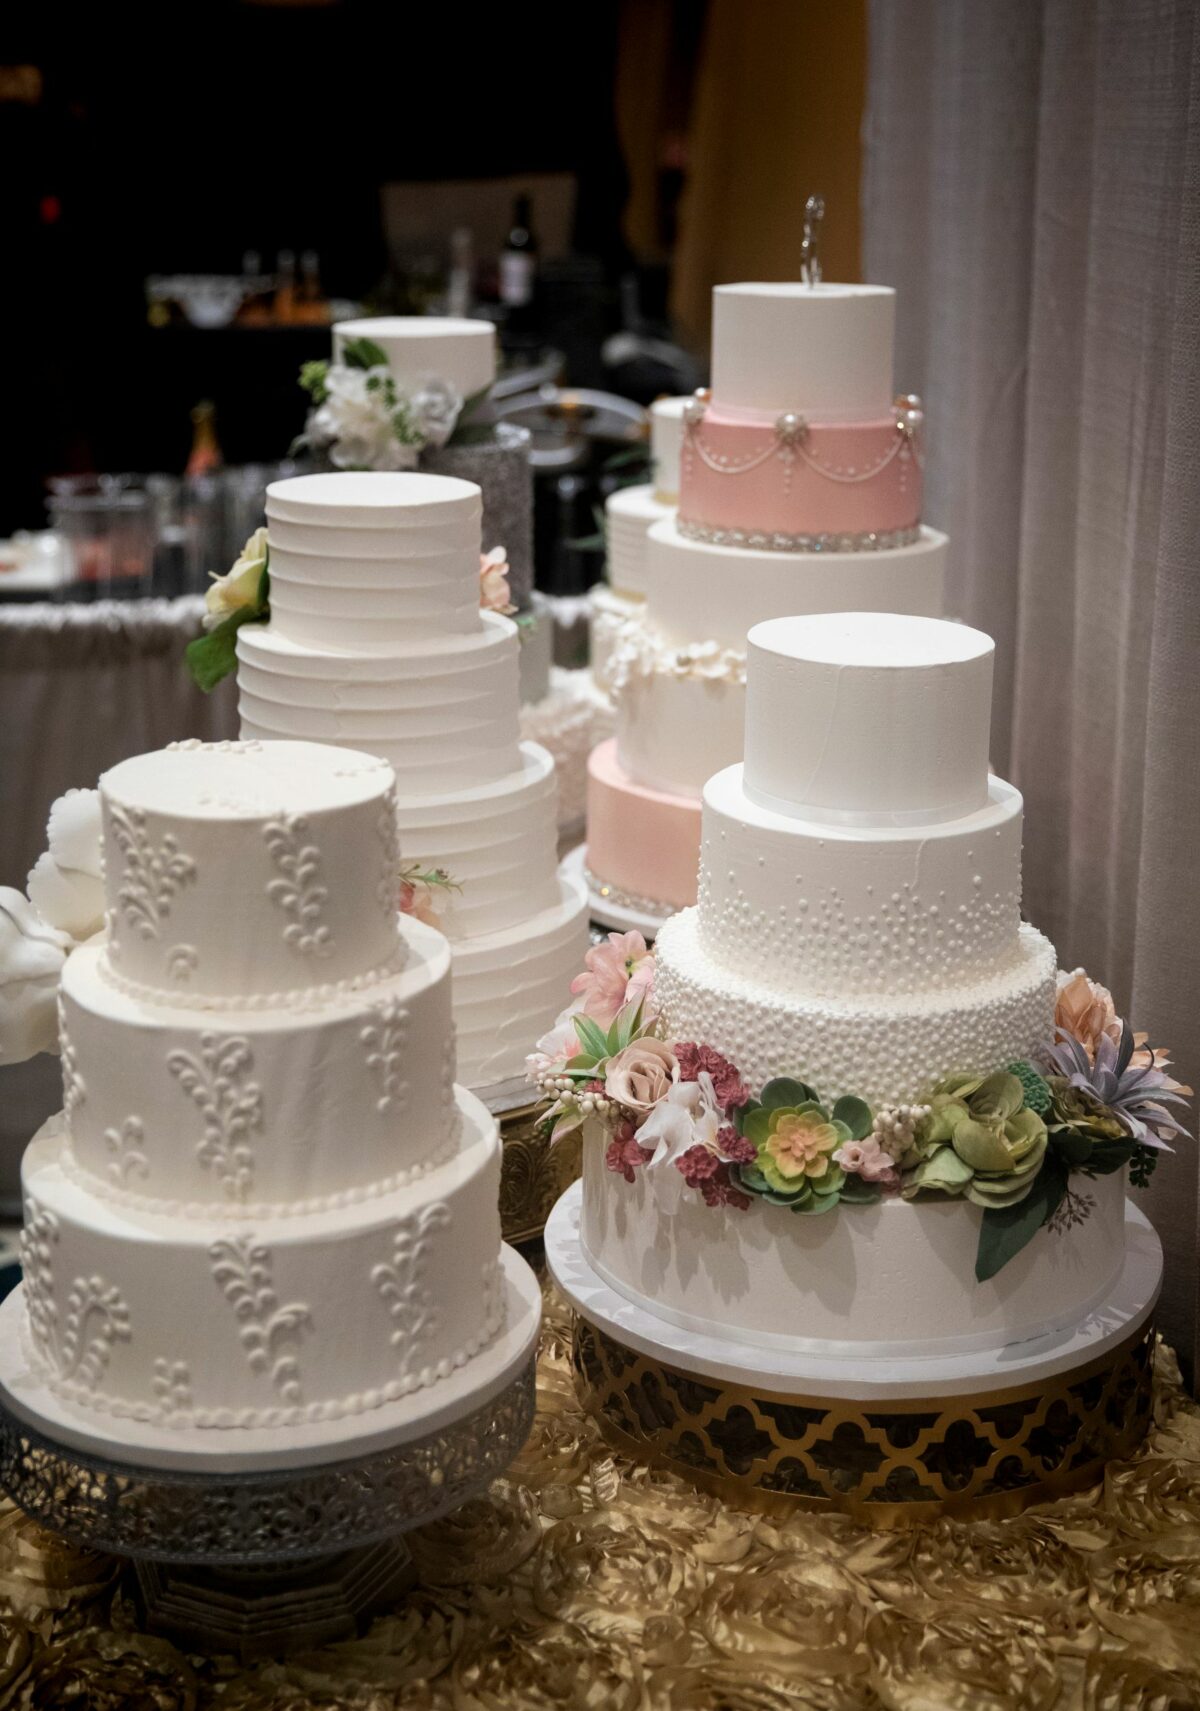 Wedding cakes come in all themes, shapes and sizes